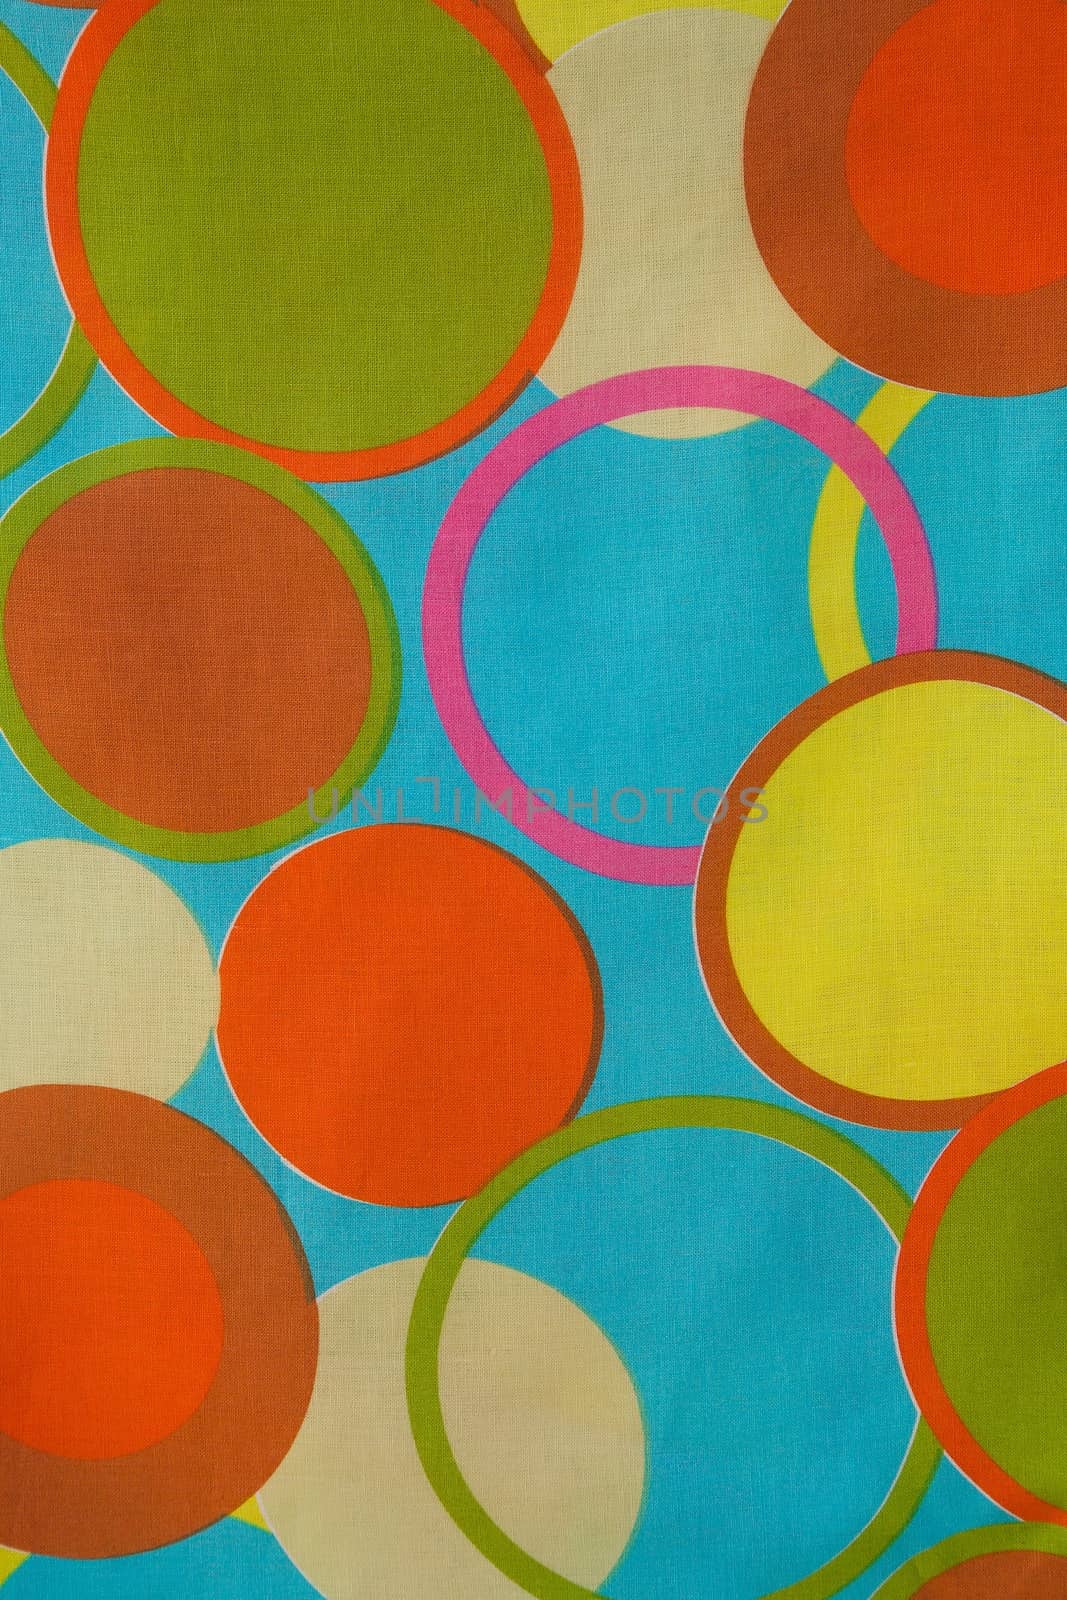 Circles on a colorful fabrics-background